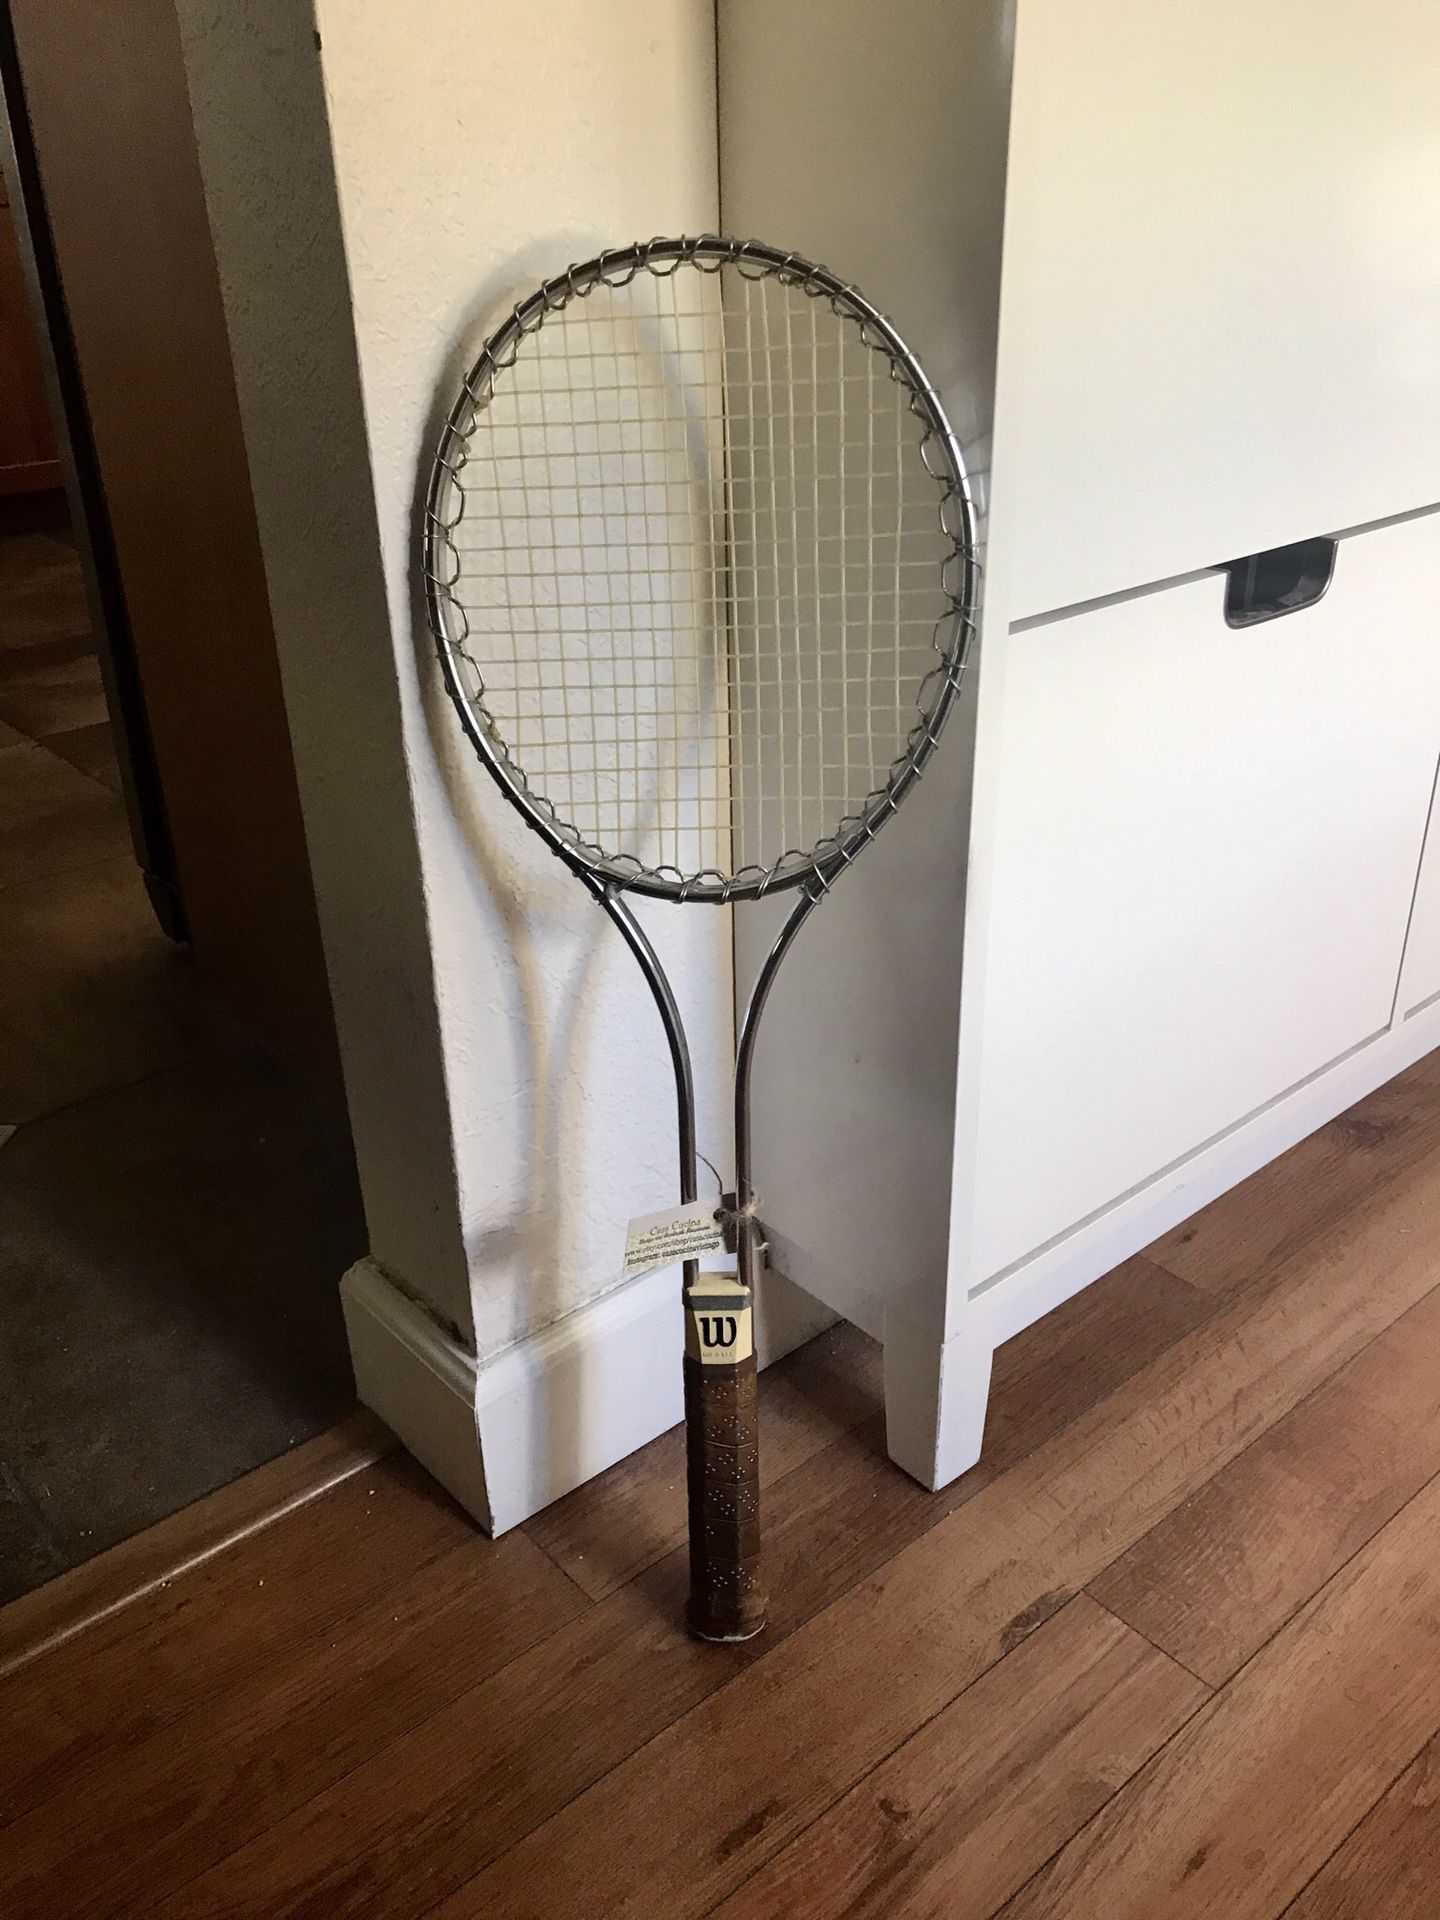 Vintage Jimmy Connors Edition Tennis Racket